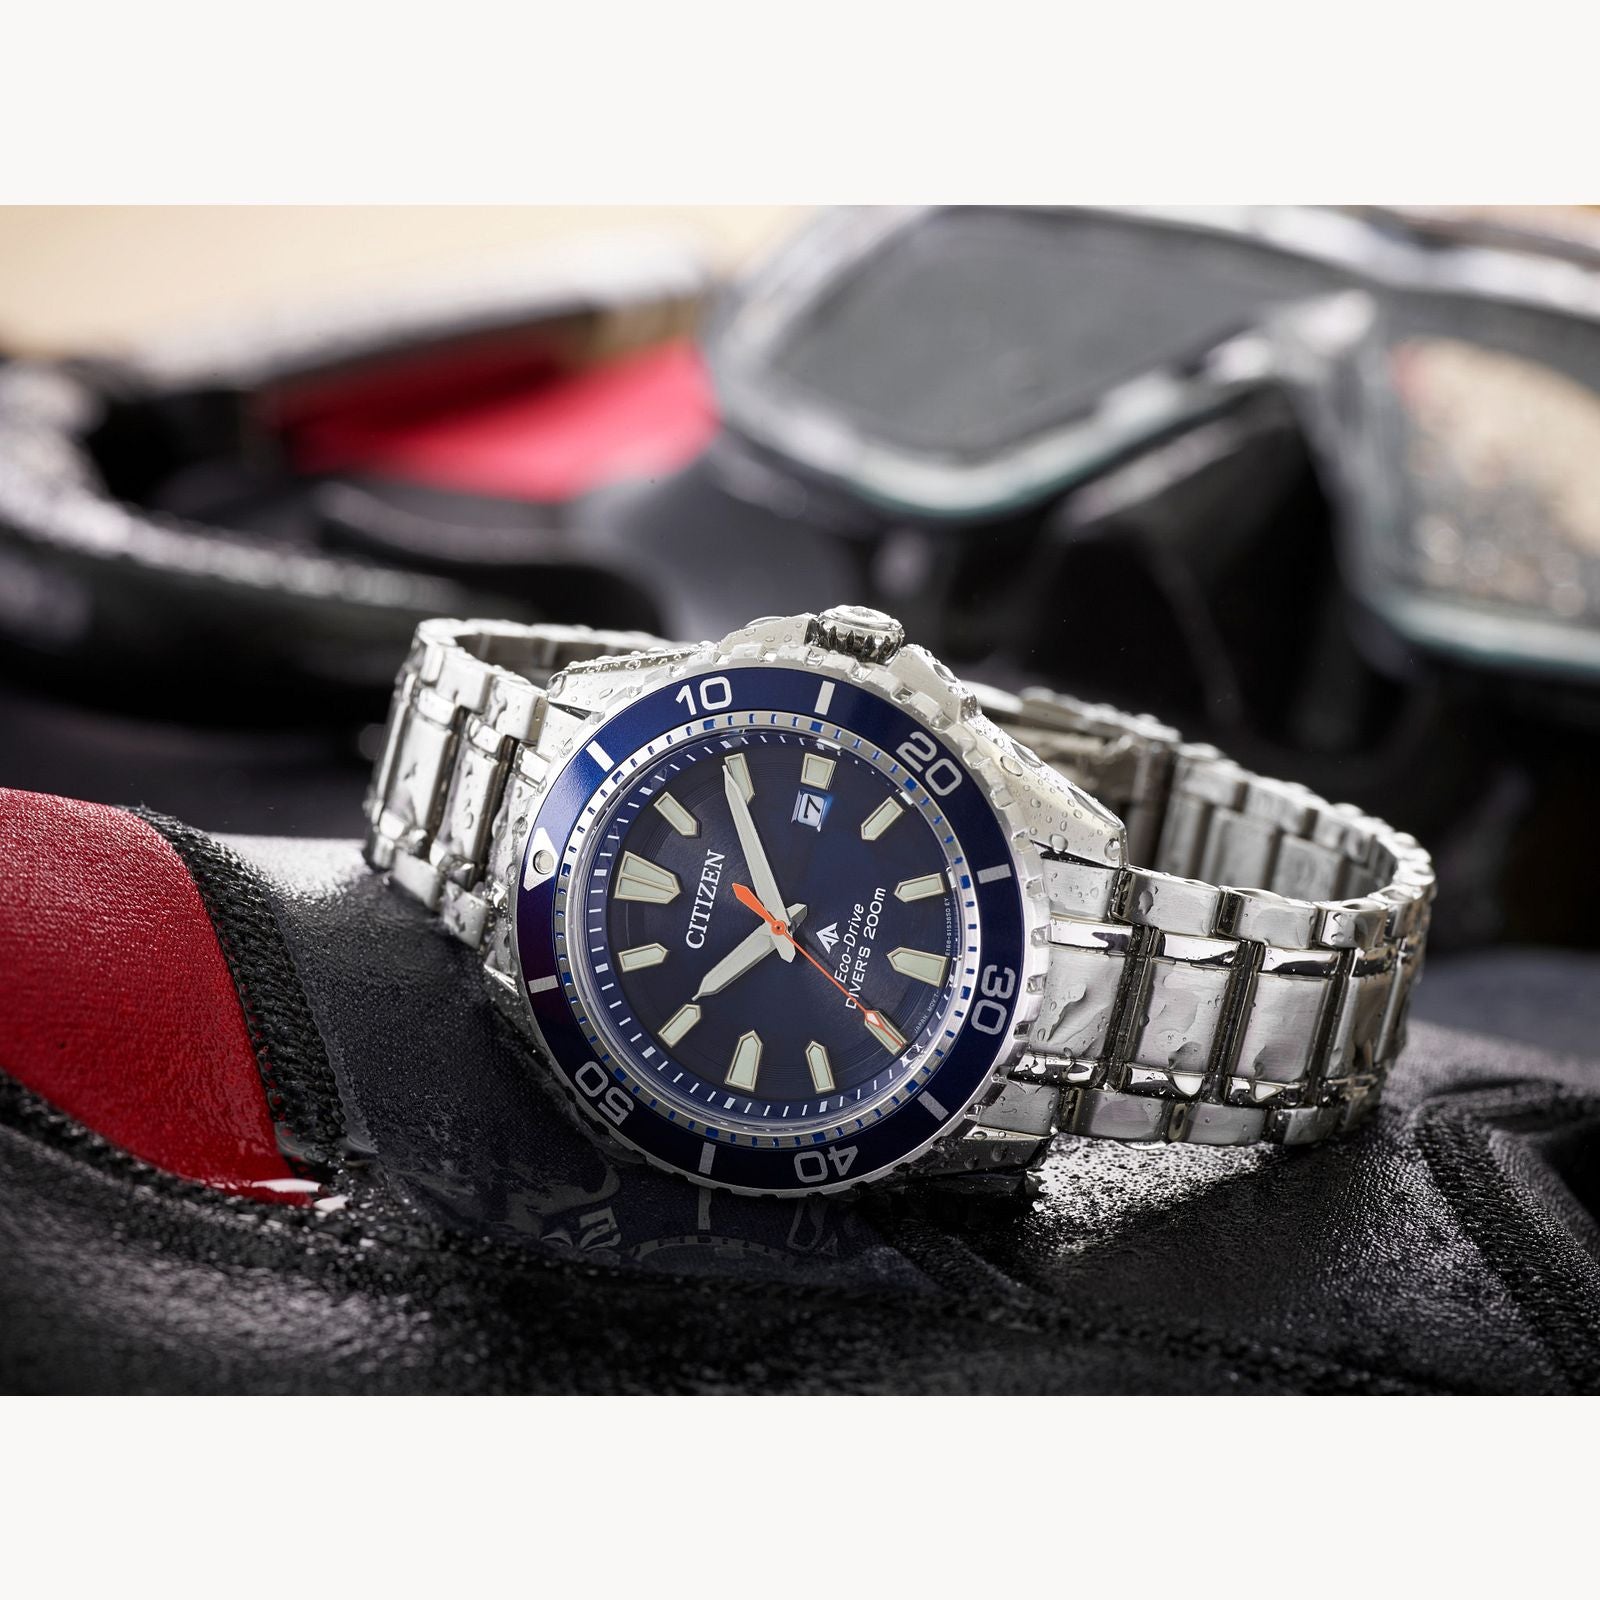 Promaster Diver Watch